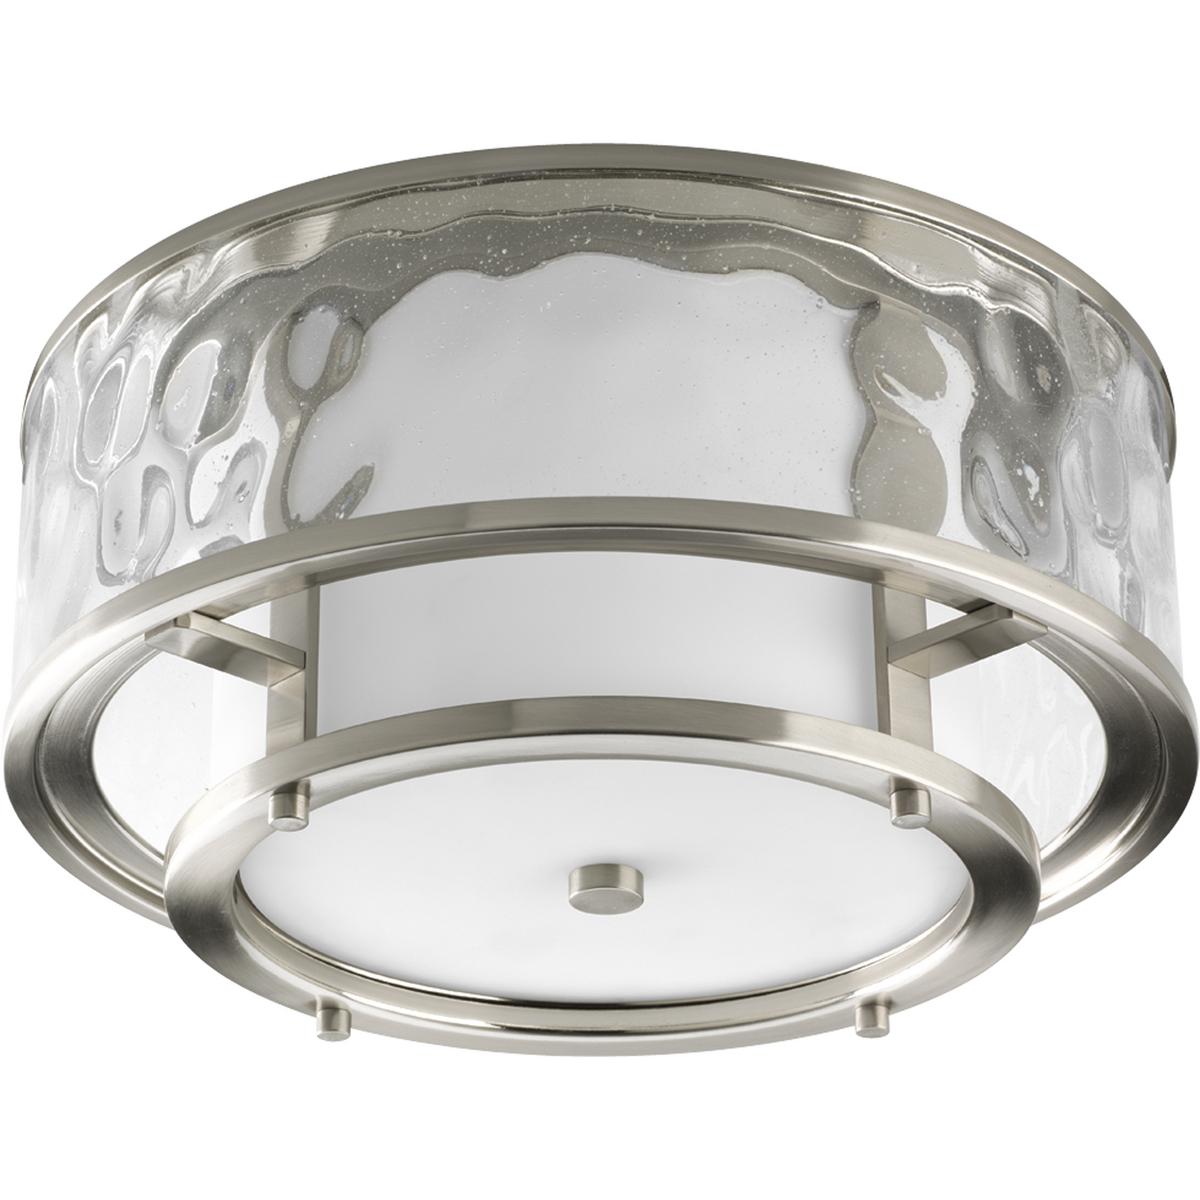 Hubbell P3942-09 Discover the antique nautical antique charm of this Bay Court Collection Two-Light 15” Flush Mount. An etched glass diffuser is surrounded by a water glass gallery for a clean, beautiful, design. This contemporary interpretation of a classic light fixture